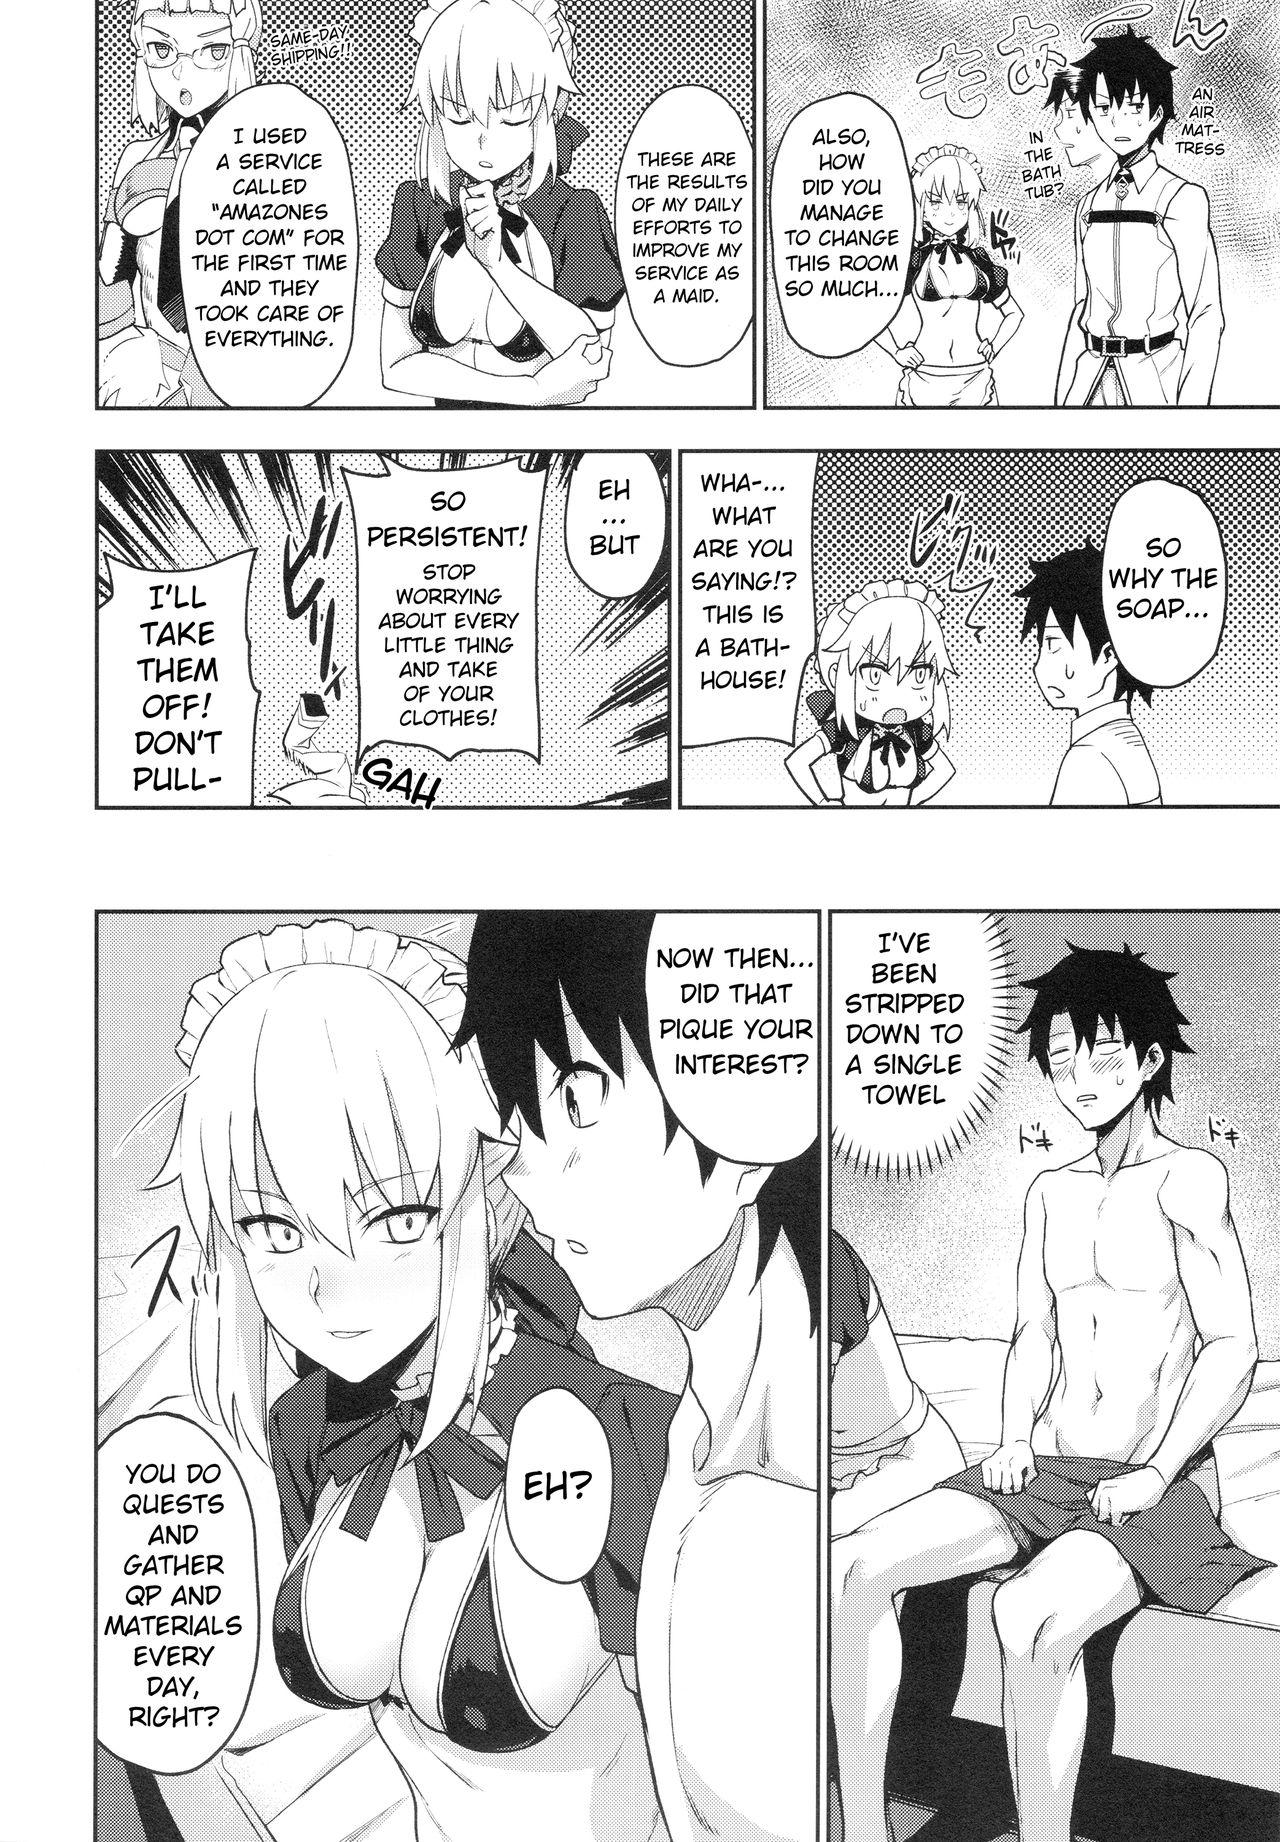 Naked Chaldea Soap SSS-kyuu Gohoushi Maid - Fate grand order Camshow - Page 4